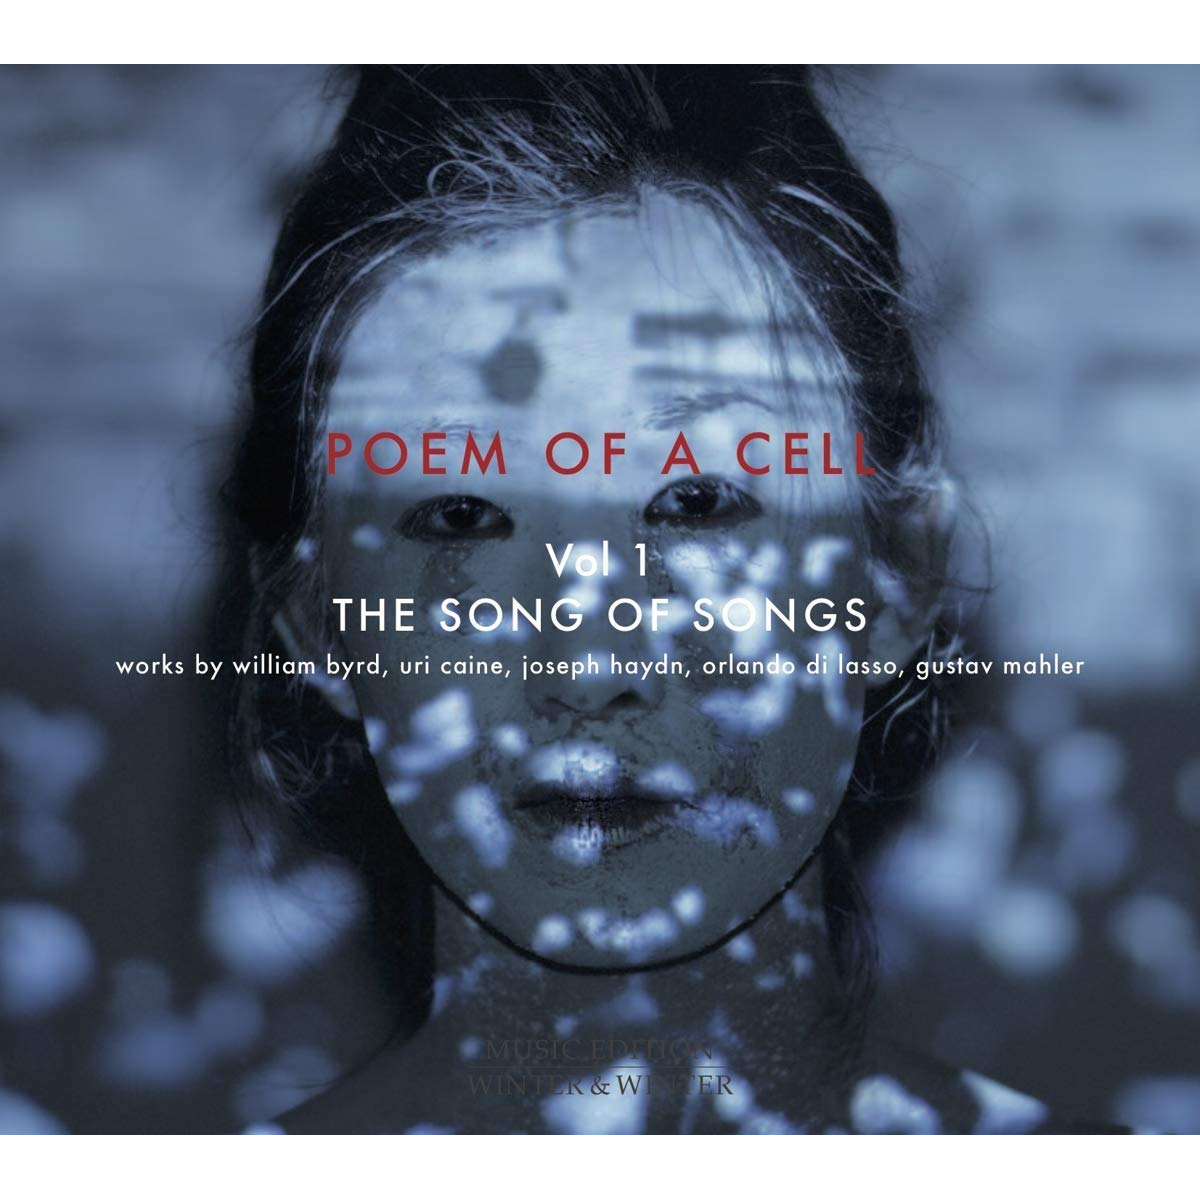 POEM OF A CELL VOL.1. - THE SONG OF SONGS